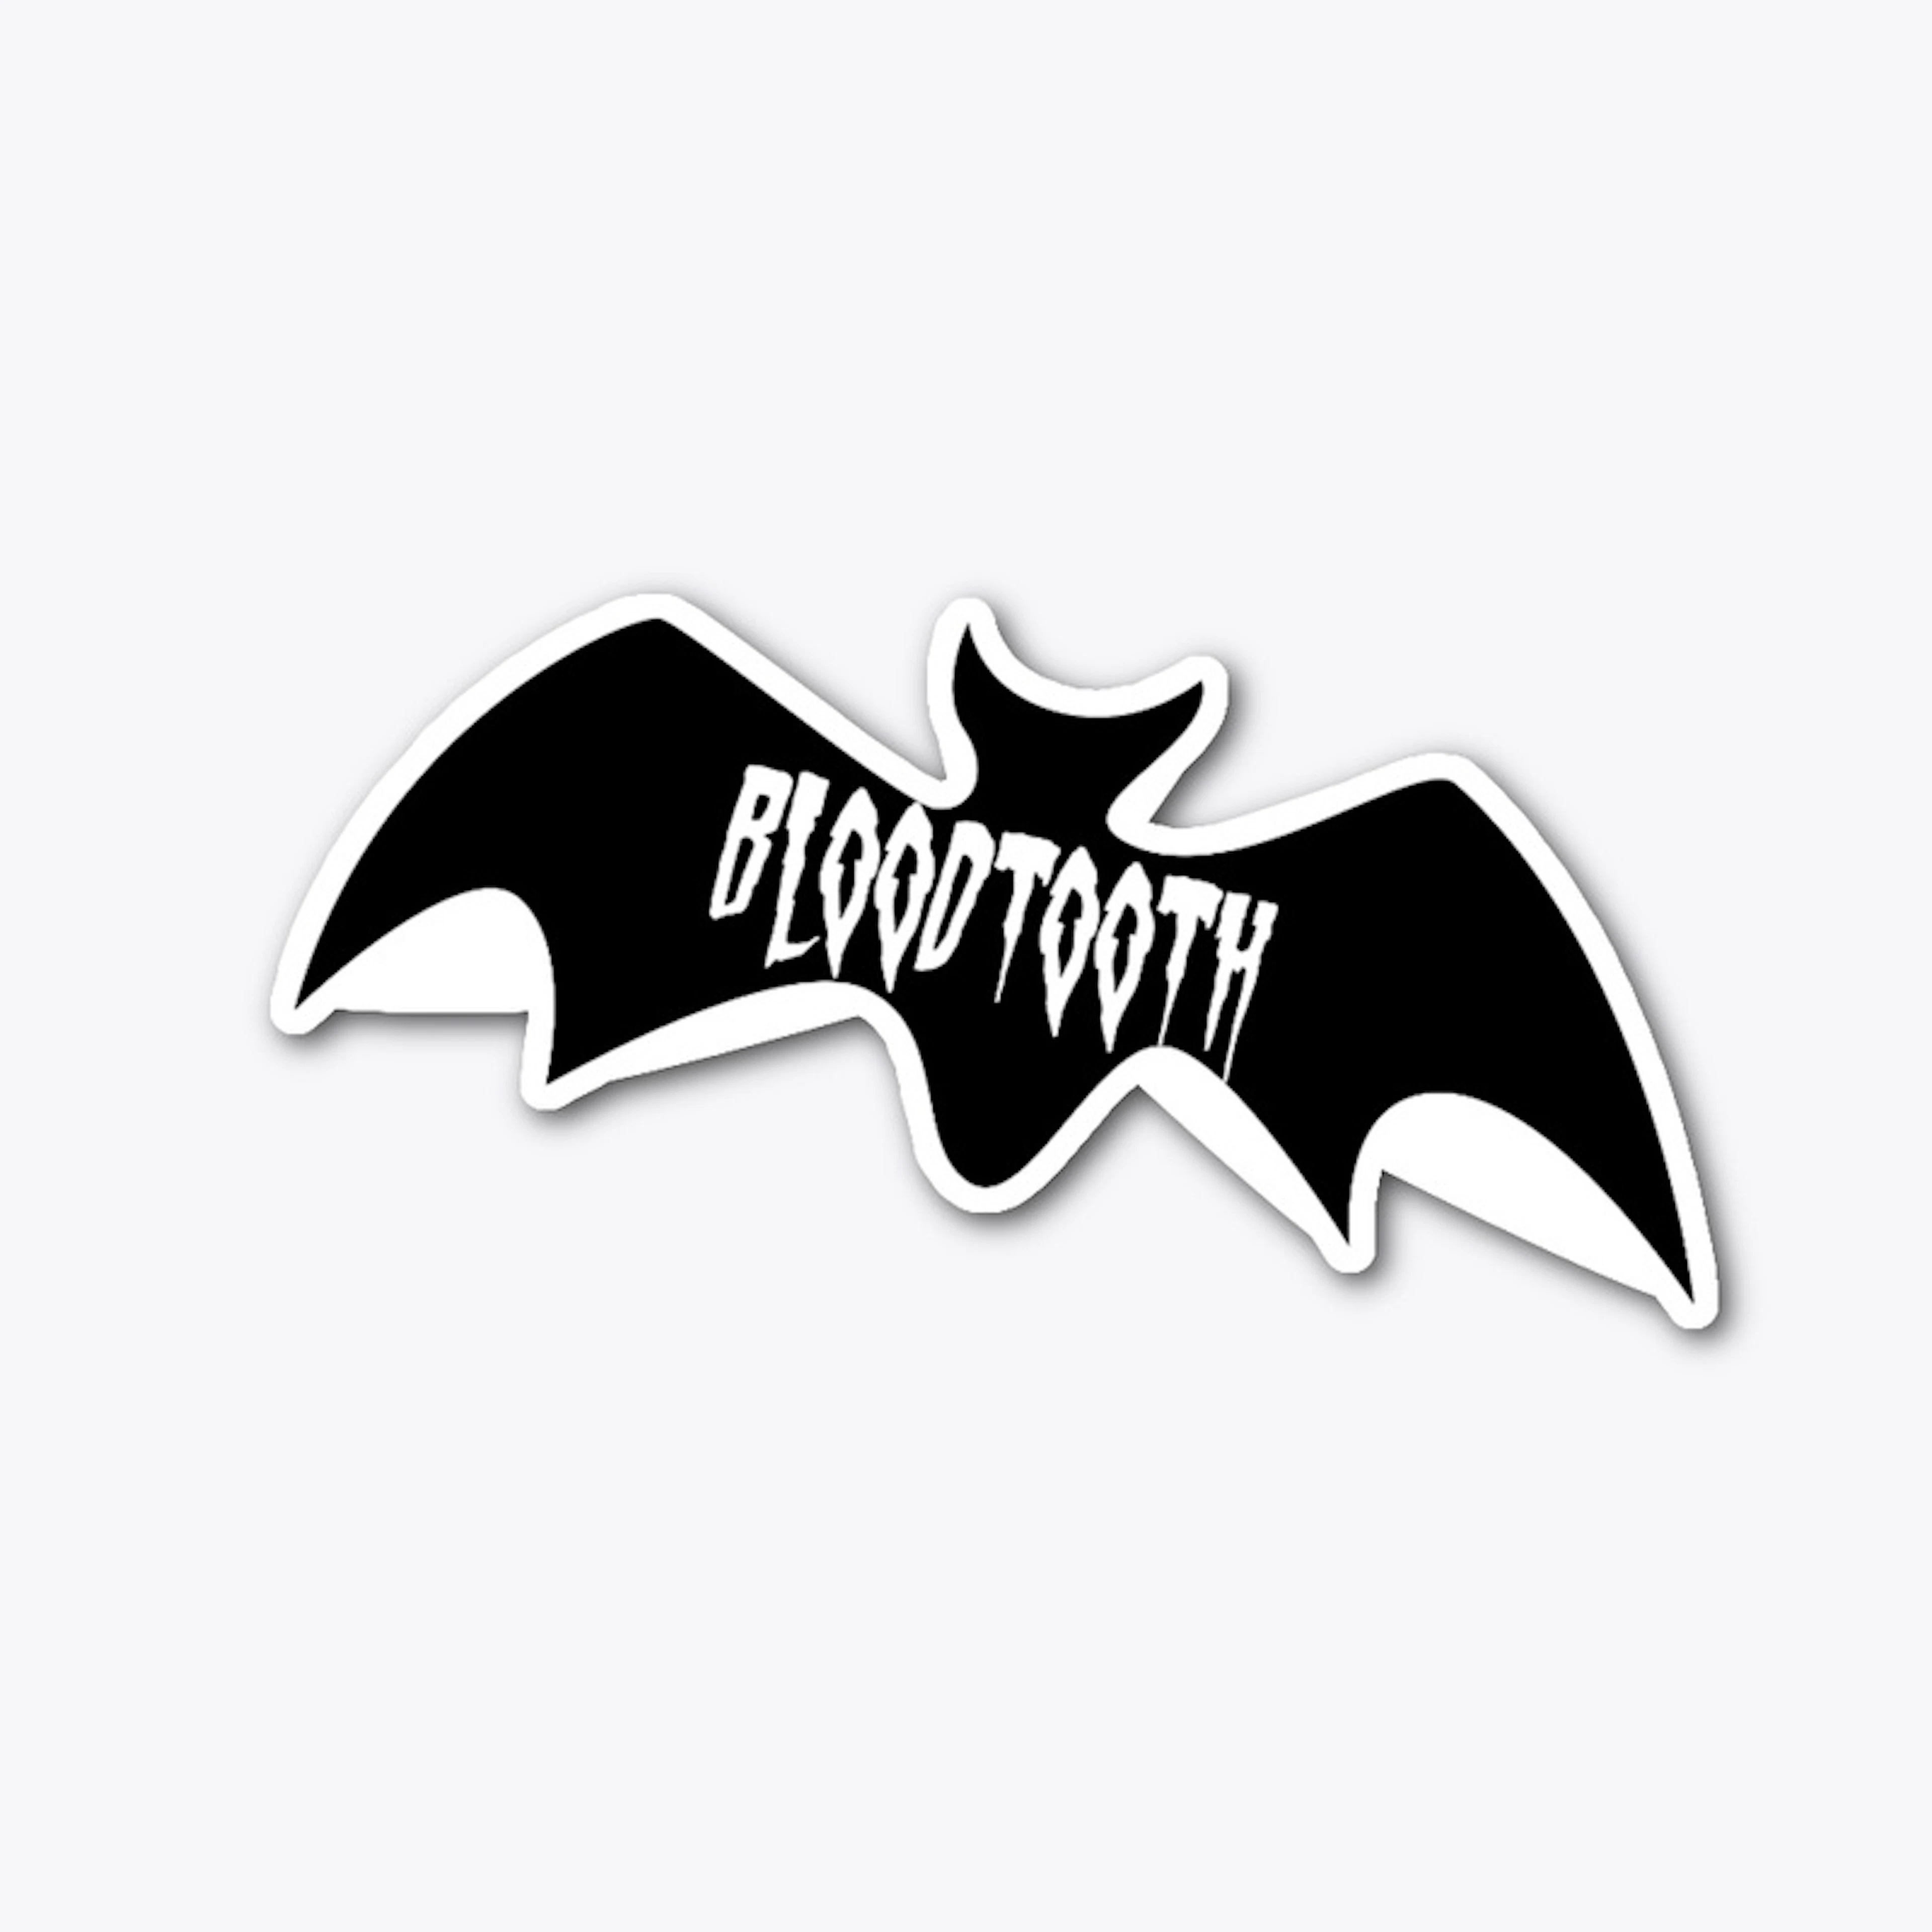 Bloodtooth Bats for vampires